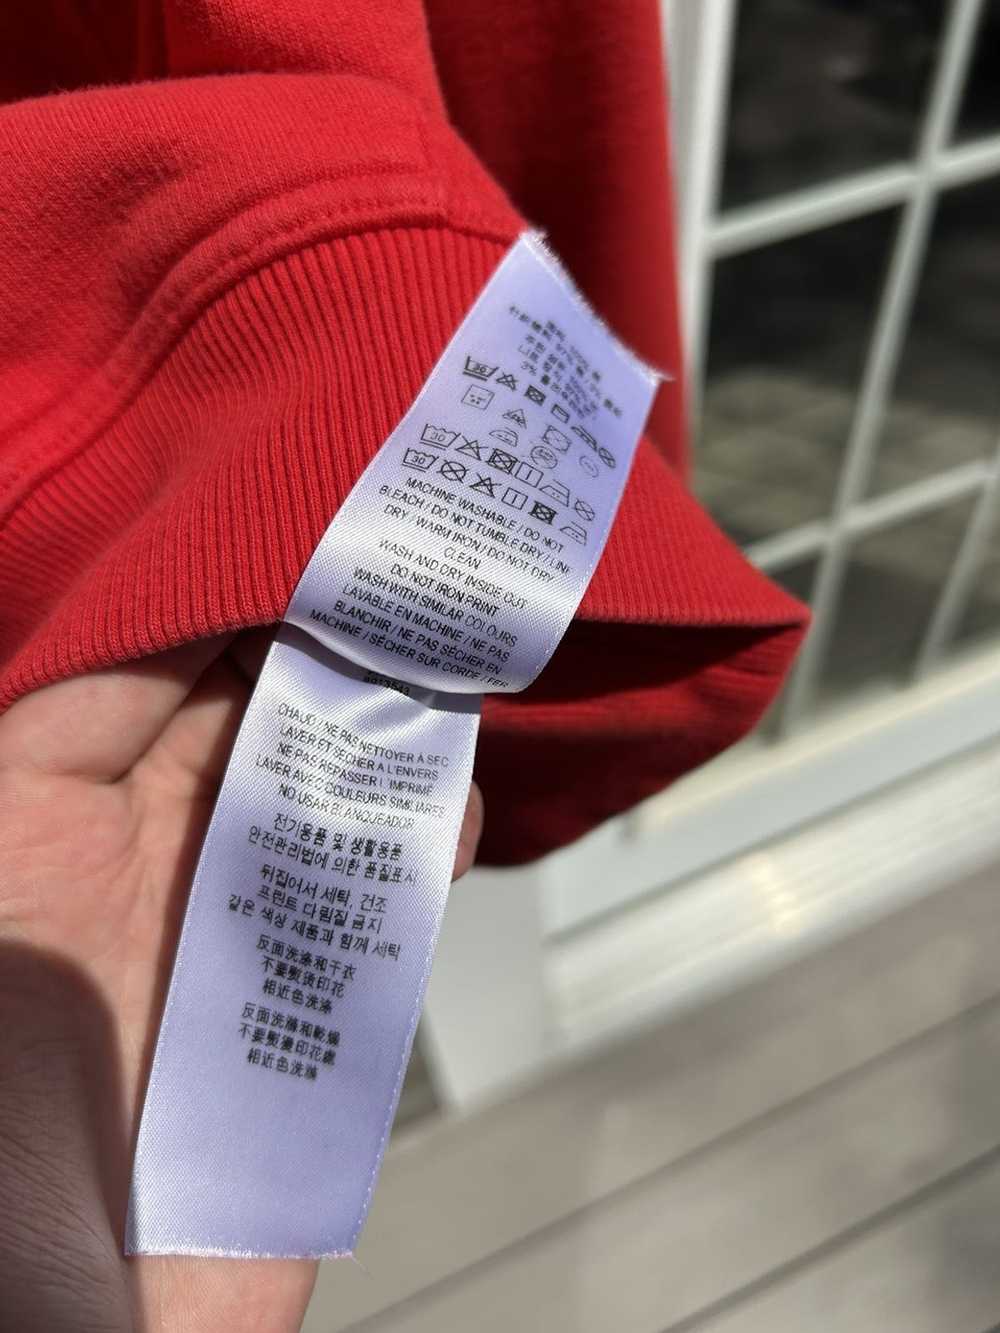 Burberry F/W 19 First Run Of The Box Logo - image 8